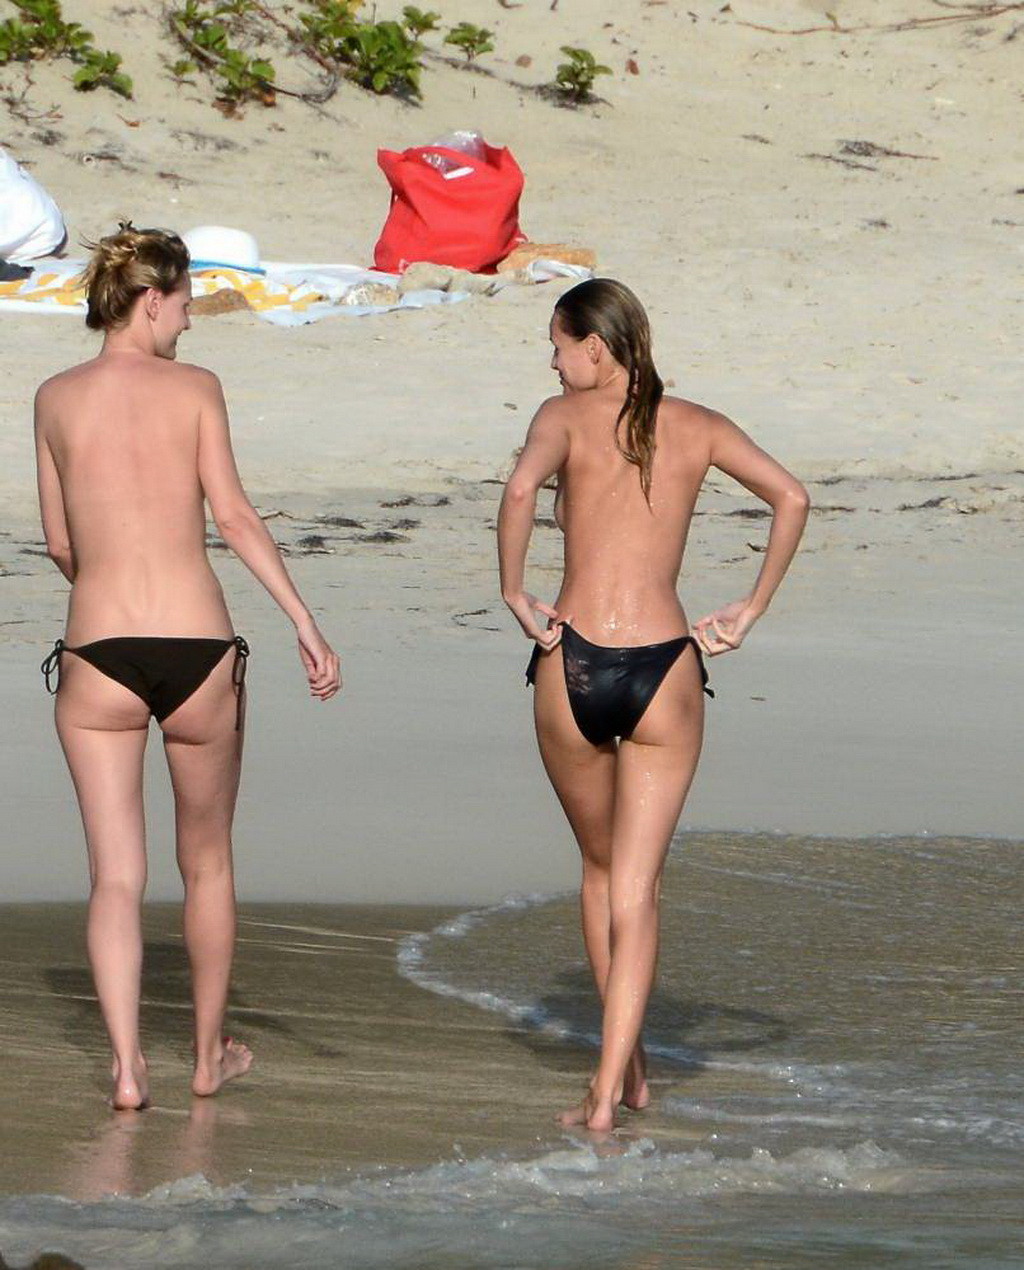 Edita Vilkeviciute caught fully naked at a beach in StBarts #75200008